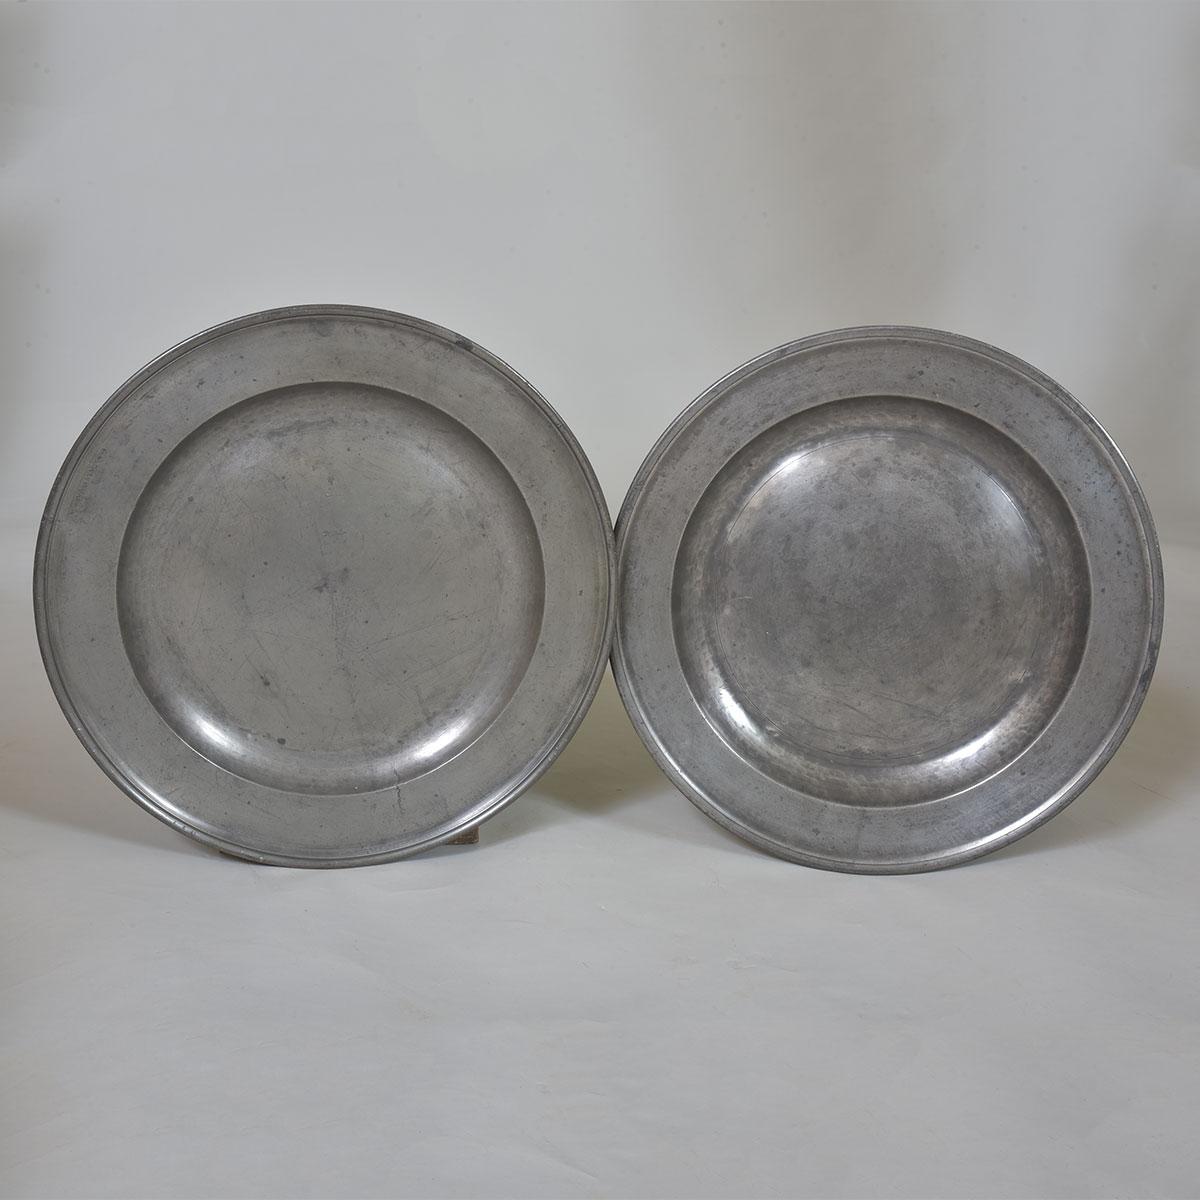 Two 18th century Pewter Chargers